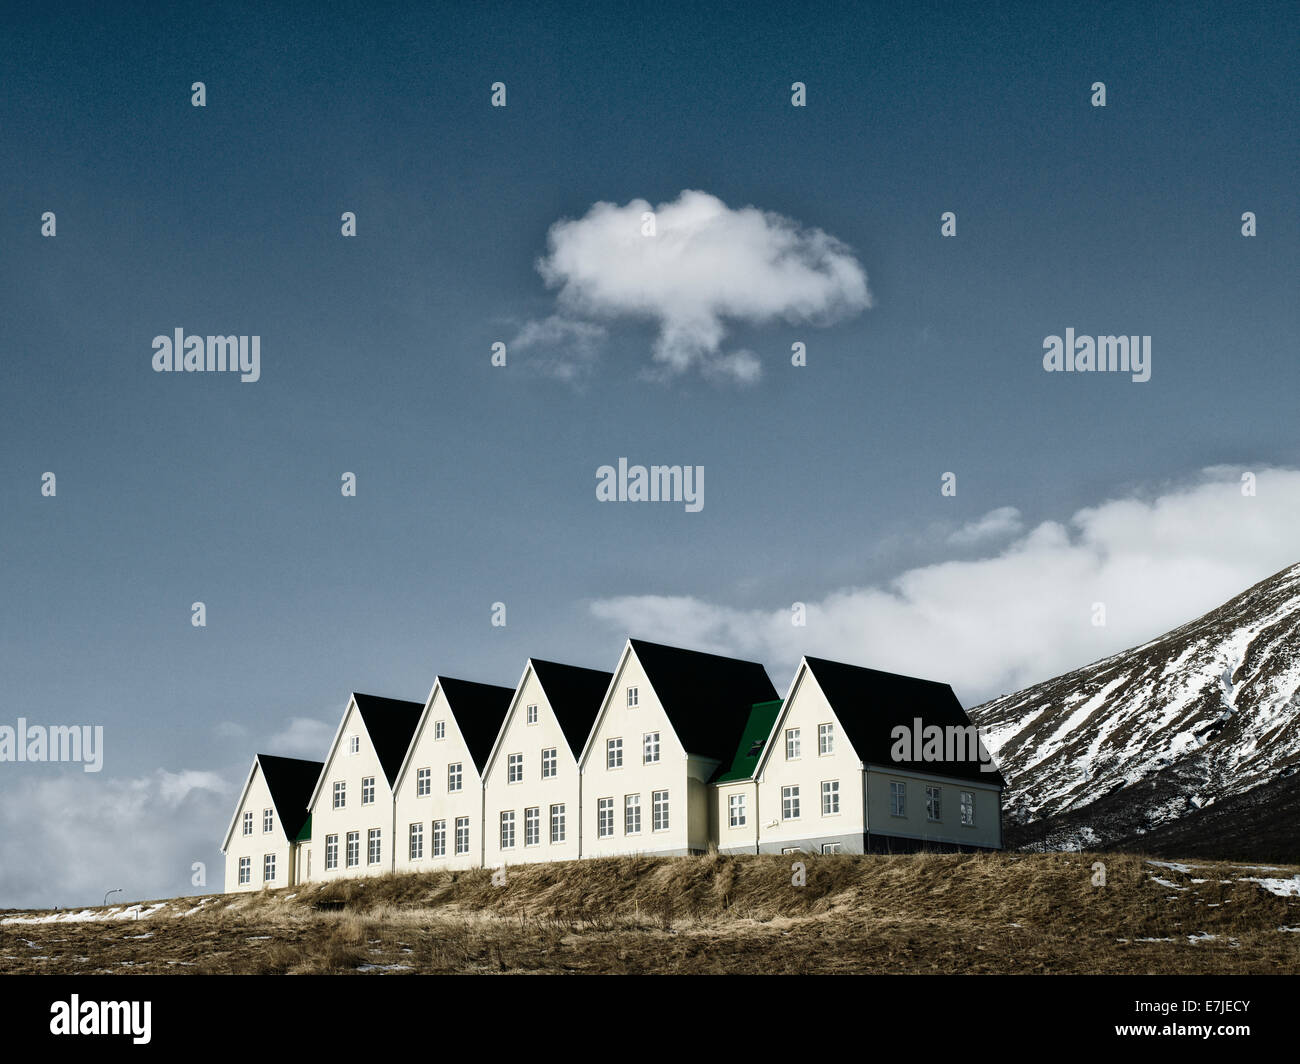 Golden triangle, house, home, island, Iceland, Europe, Laugardalur, Laugarvatn, Northern Europe, winter, houses, homes, Stock Photo